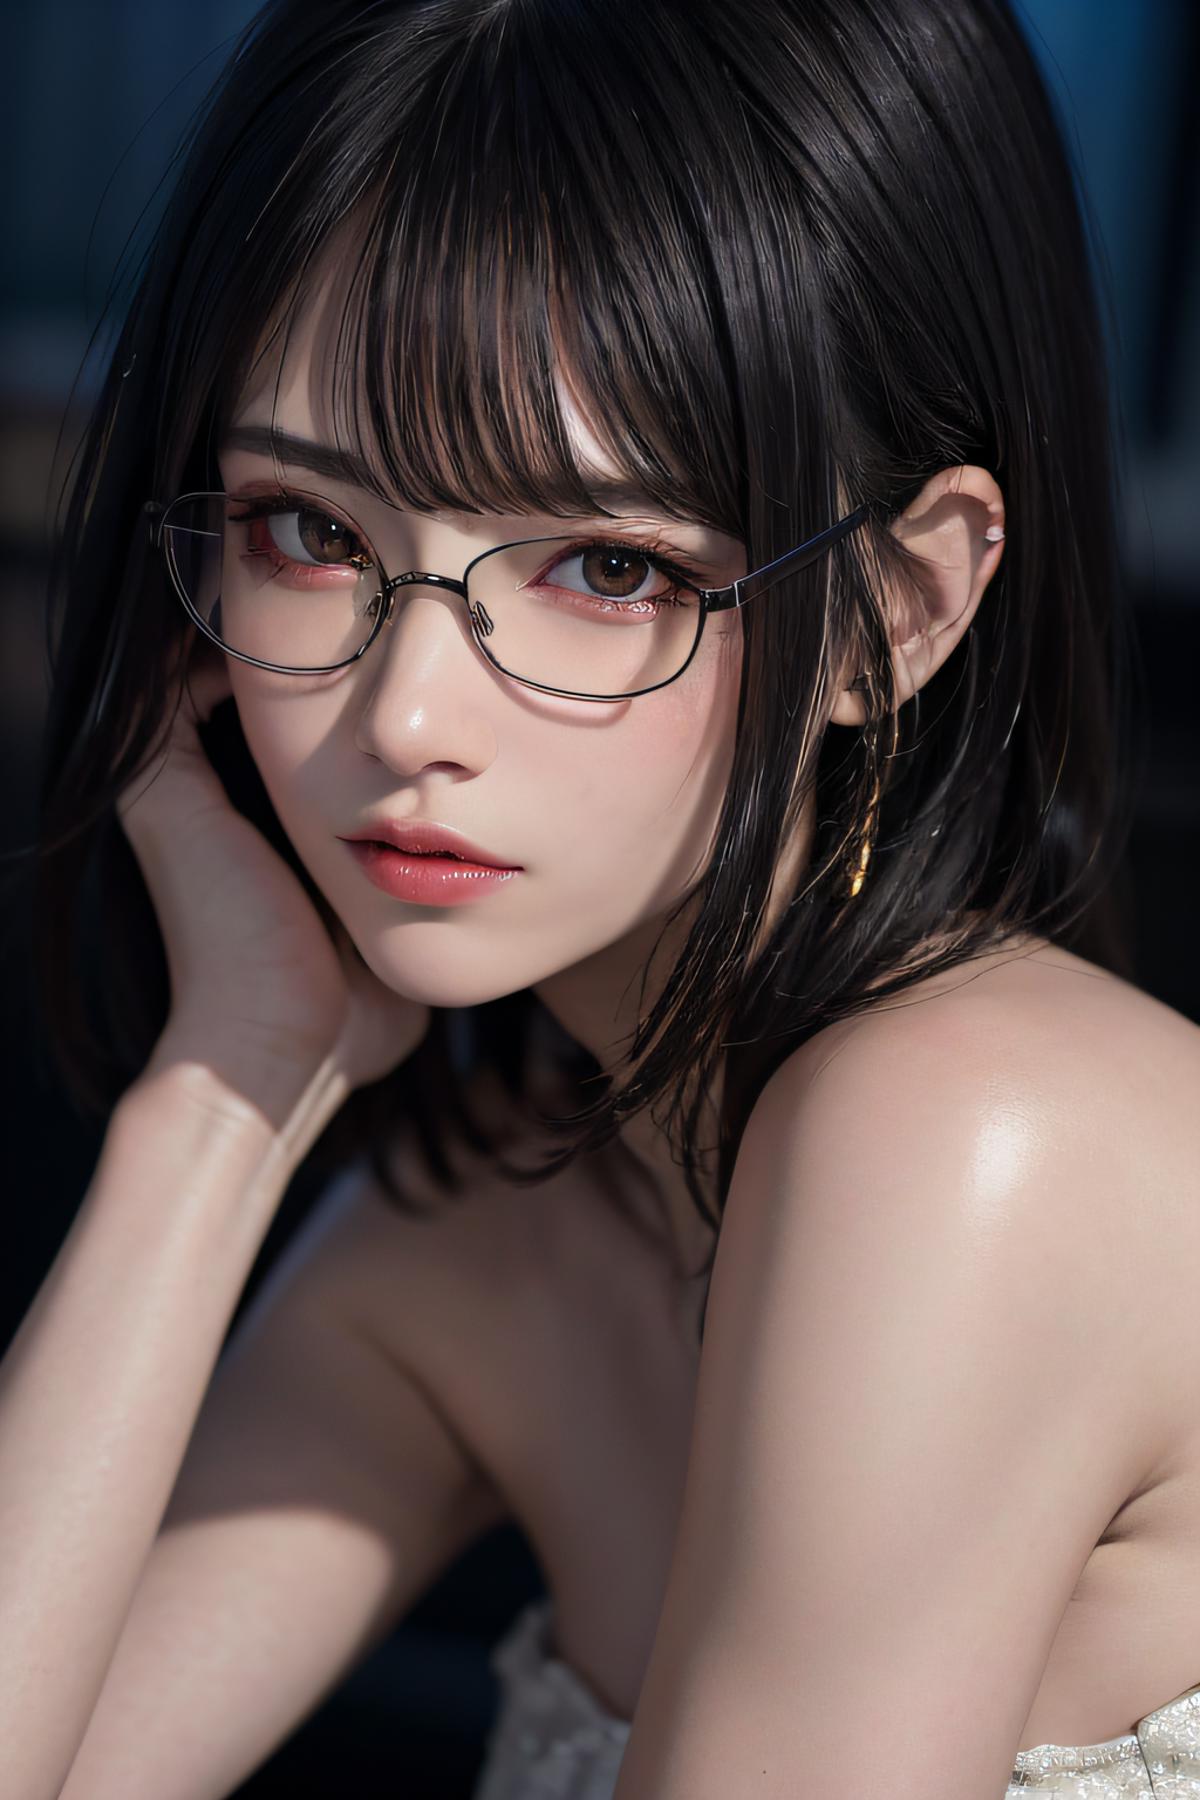 AI model image by Krone0406